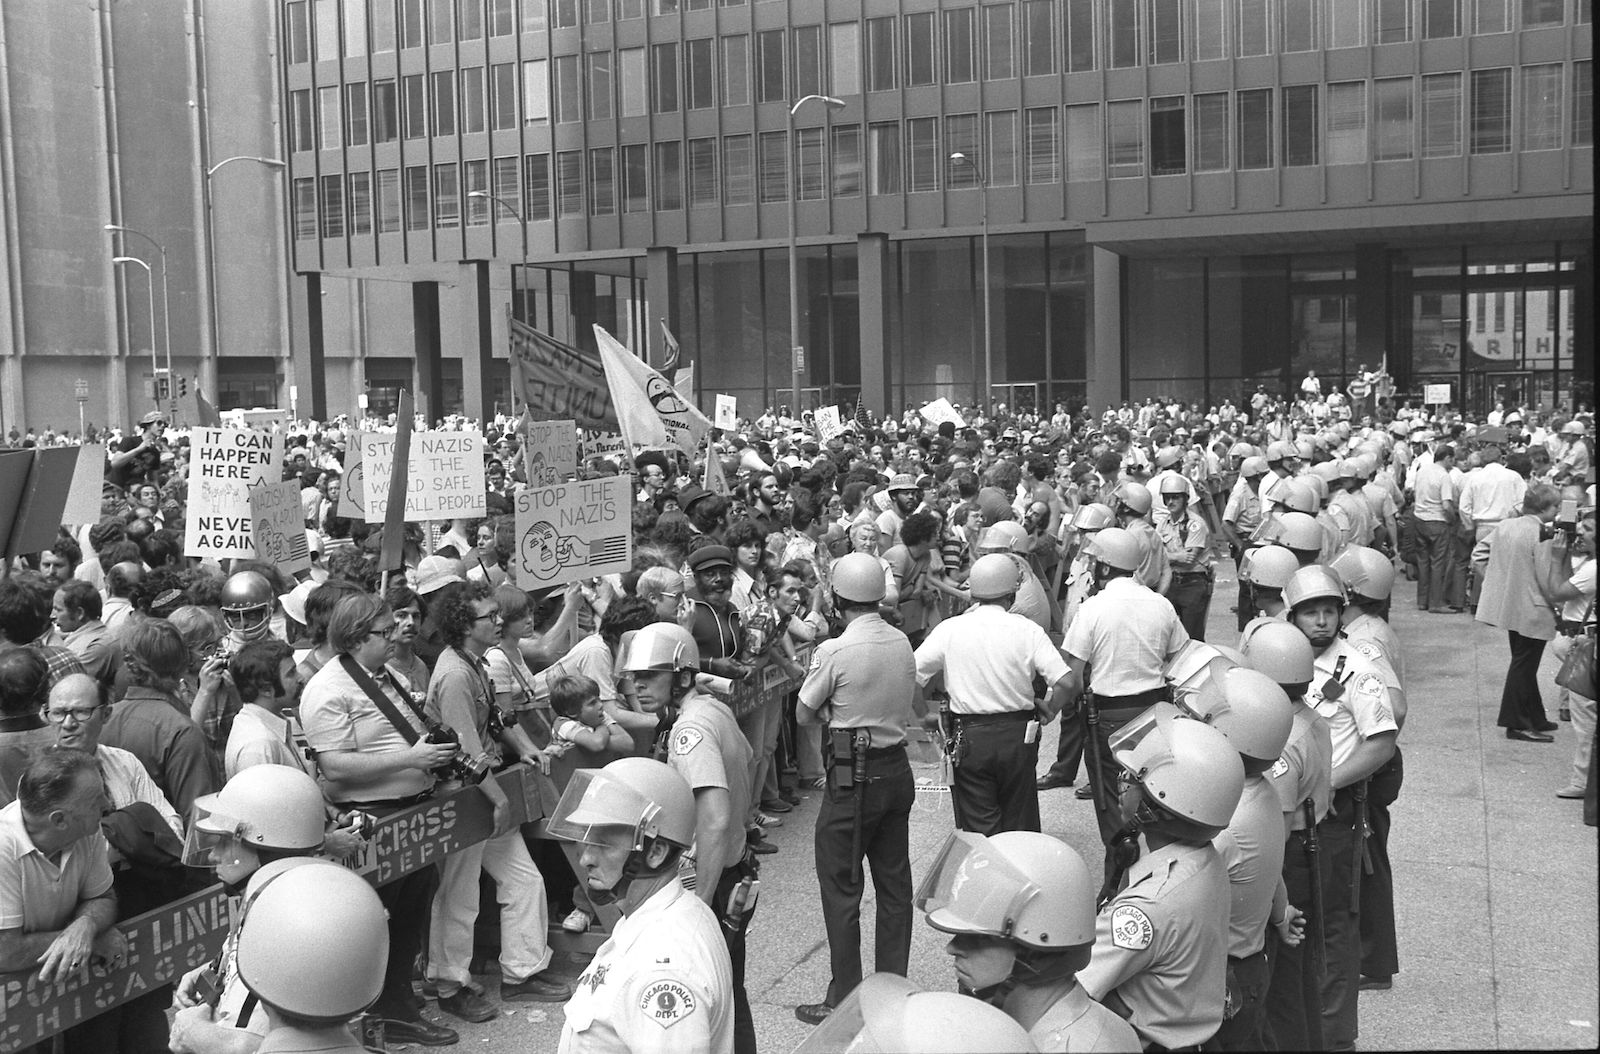 Counter-demonstrators at a neo-Nazi rally in Chicago from the Los Angeles Times Photographic Collection, c. 1978. The Regents of the University of California (CC BY 4.0).